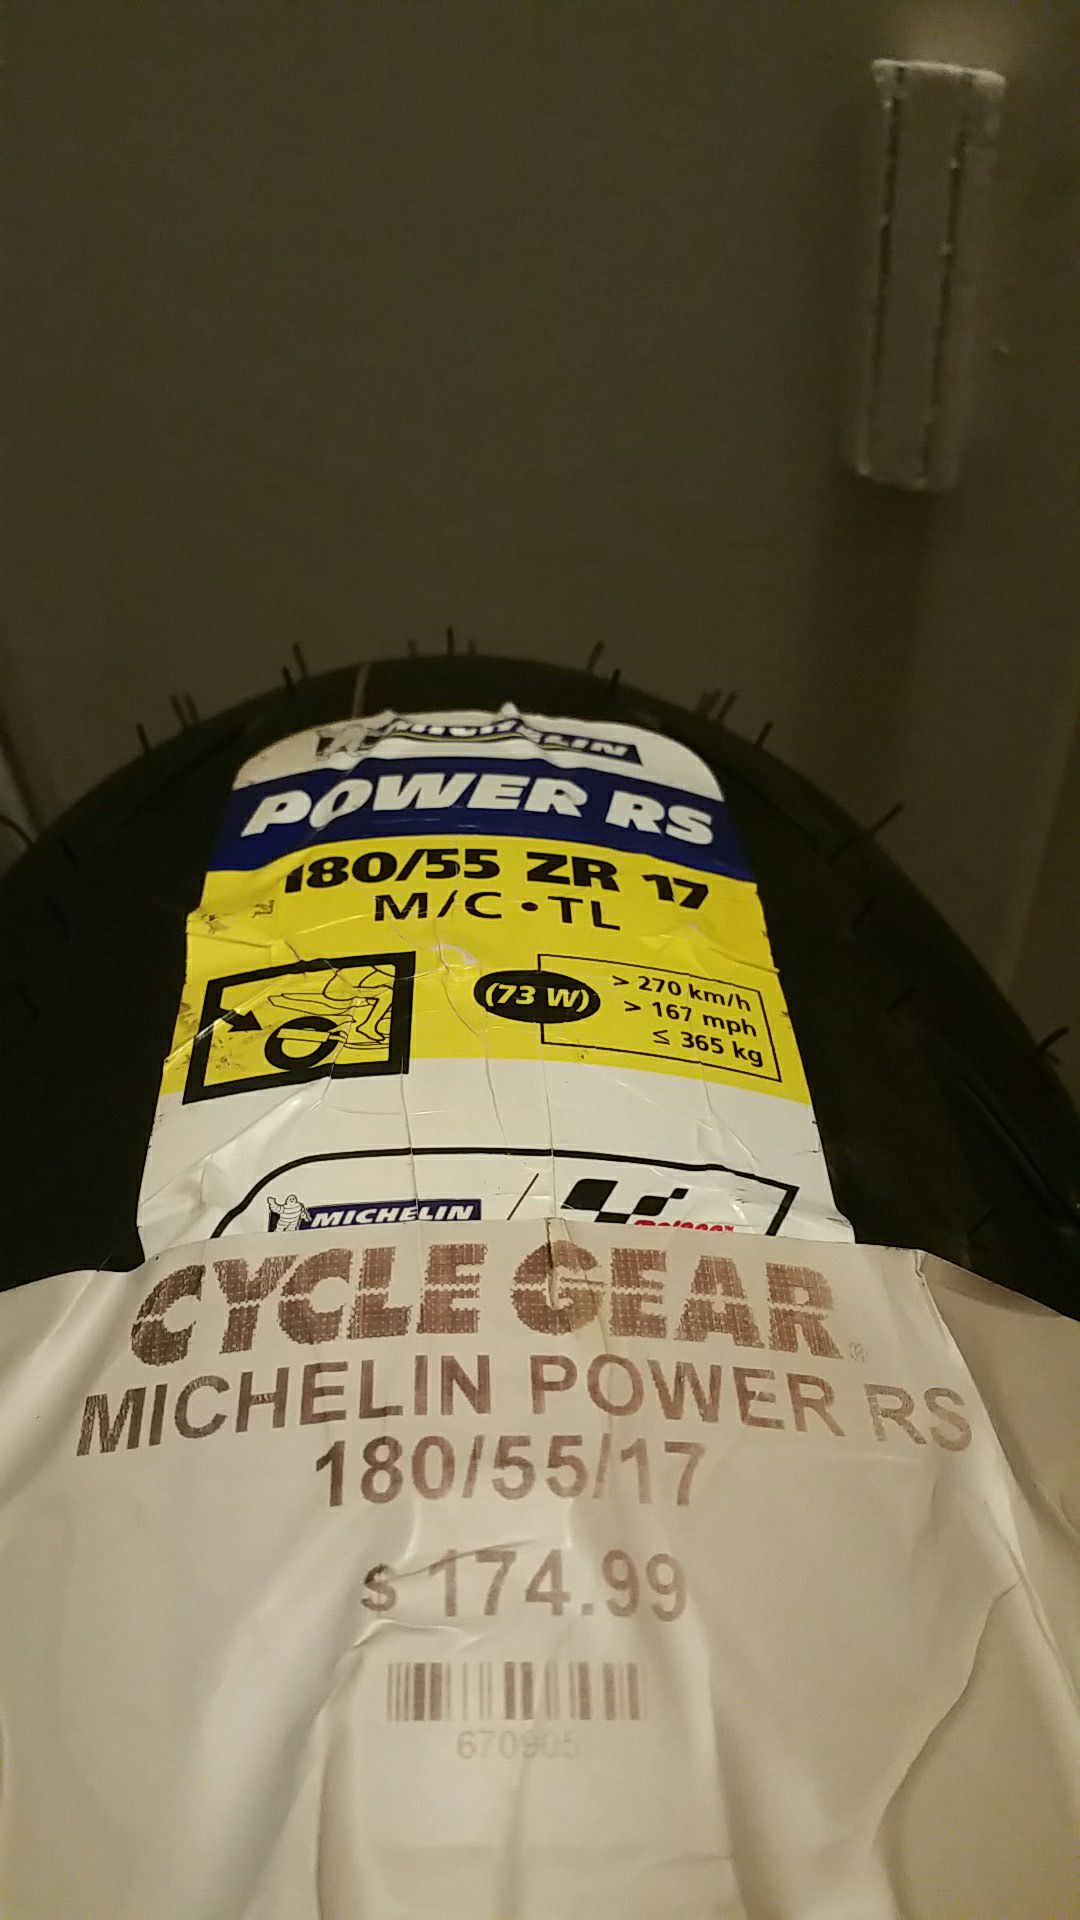 **BRAND NEW ** MICHELIN POWER RS Motorcycle Tire. 180/55 ZR 17.